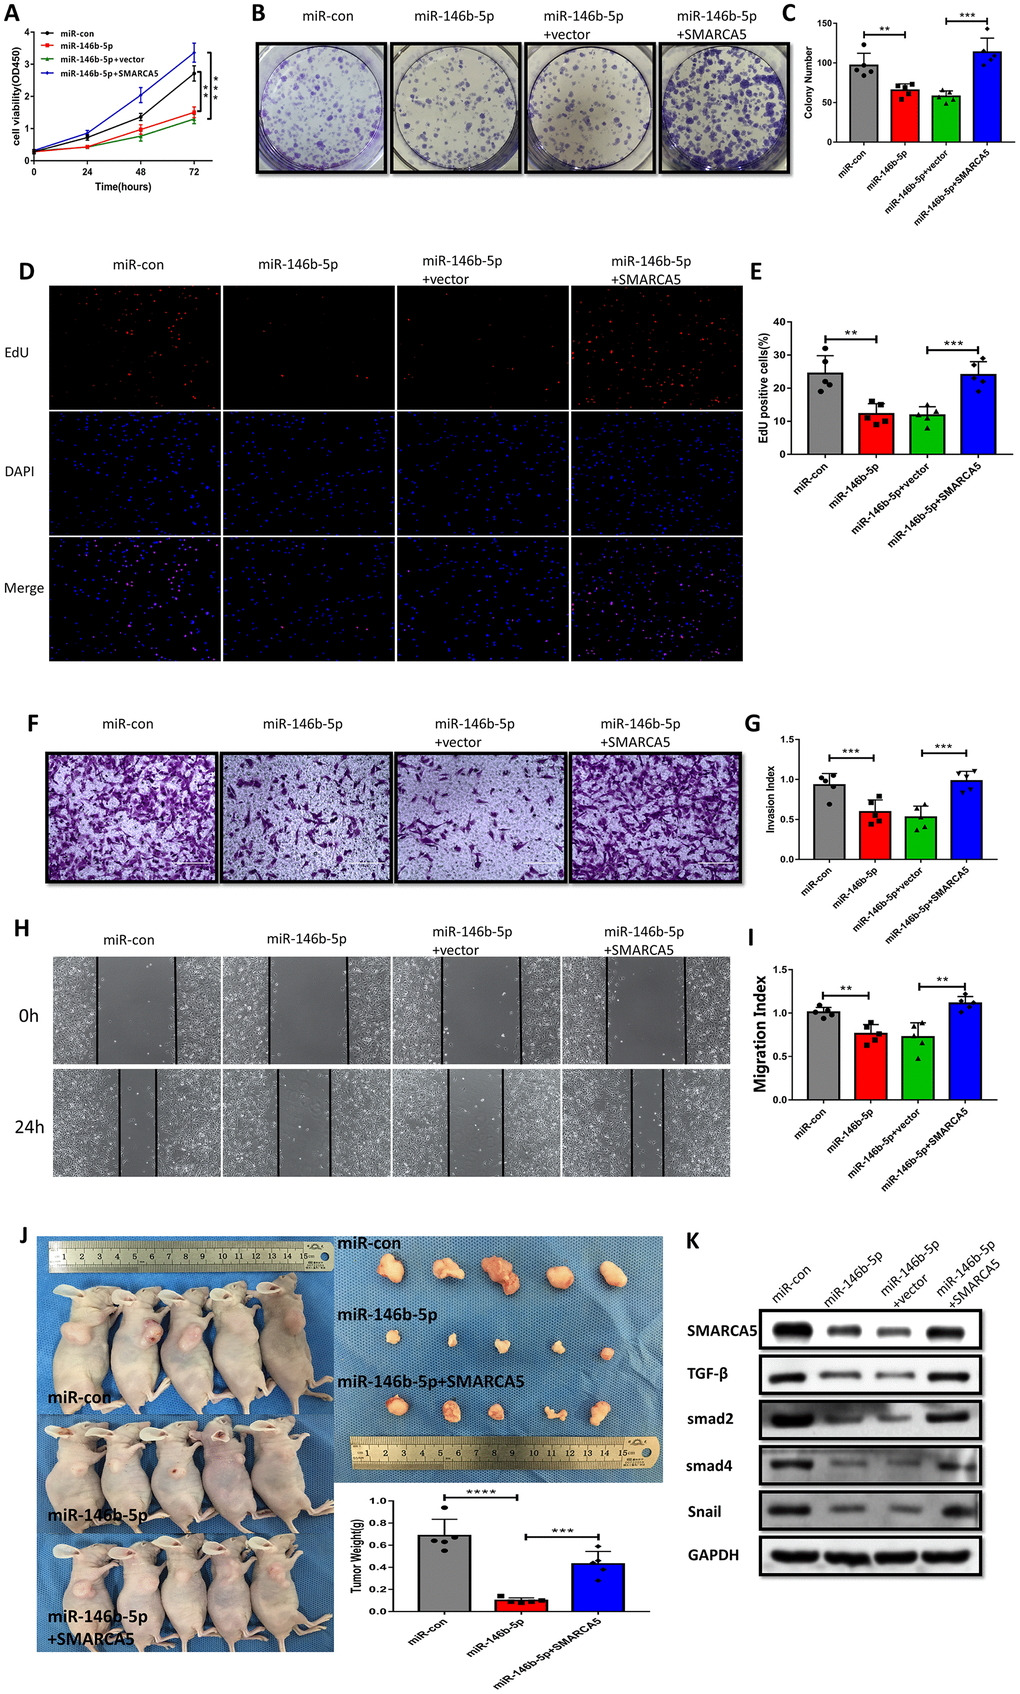 SMARCA5 restoration reverses miR-146b-5p-mediated inhibition of F GSC/MSC proliferation and metastasis. (A) CCK8, (B and C) colony formation, and (D and E) EdU assays were conducted to evaluate F GSC/MSC proliferation after transfection with miR-146b-5p alone or co-transfection with miR-146b-5p plus SMARCA5. (F and G) Transwell assays to assess the invasiveness of F GSC/MSCs transfected with miR-146b-5p alone or with miR-146b-5p plus SMARCA5. (H and I) Wound healing assays to assess migration of F GSC/MSCs transfected with miR 146b 5p alone or with miR-146b-5p plus SMARCA5. (J) Xenograft model for evaluation of tumorigenesis in vivo. (K) Western blot analysis of proteins in the TGF β pathway in F GSC/MSCs transfected with miR-146b-5p alone or with both miR 146b 5p and SMARCA5.